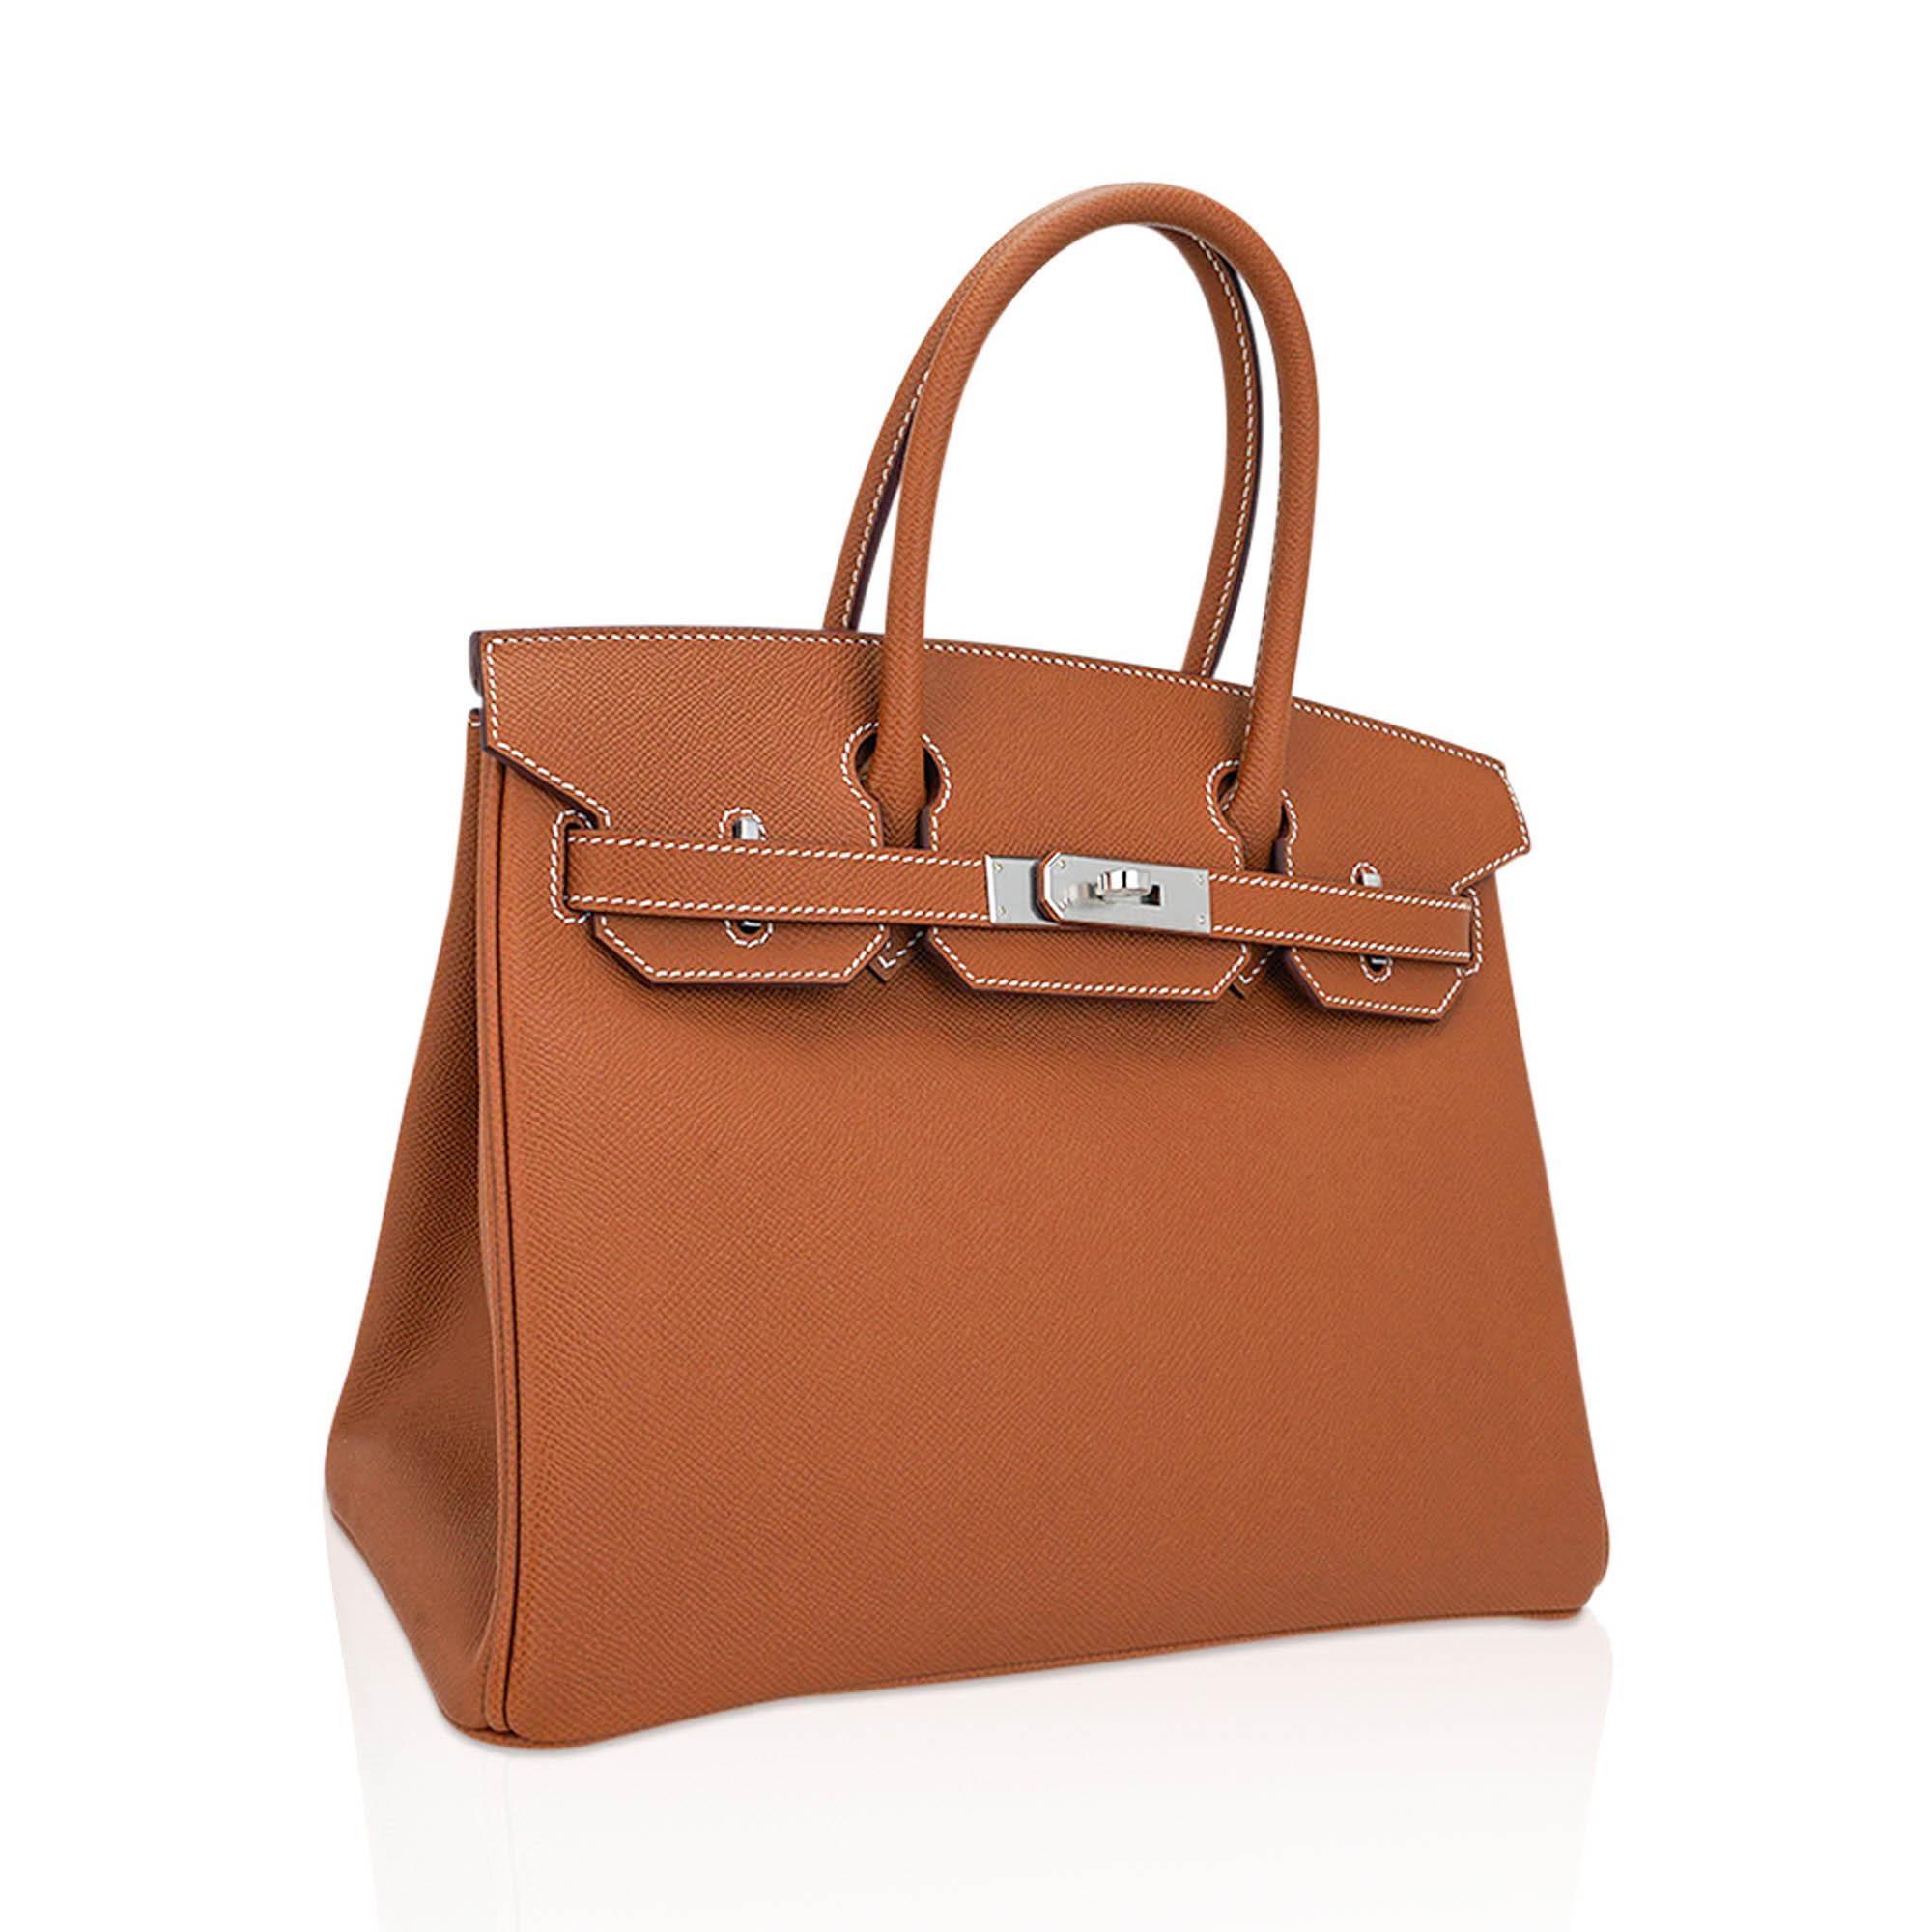 Mightychic offers an Hermes Birkin 30 bag featured in iconic Gold.
Fresh and crisp with Palladium hardware.
Accentuated with signature bone top stitch. Epsom leather is light in weight and maintains the shape of the bag beautifully.
Comes with lock,